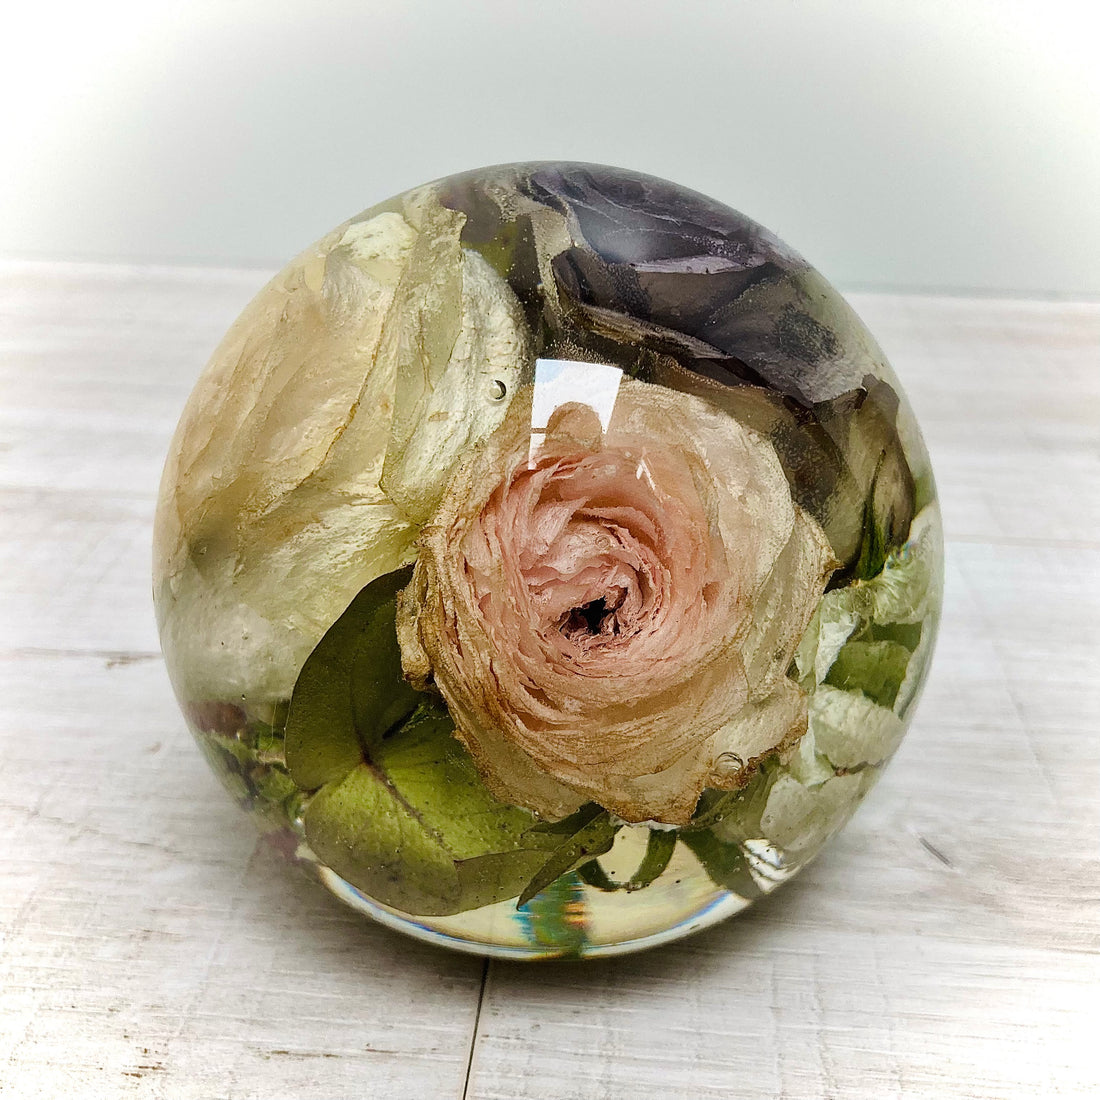 A beautiful 14cm spherical glass dome displaying preserved wedding flowers. The delicate petals and vibrant colors are encased in a clear and smooth glass ball, making it a timeless and unique keepsake to remember your special day